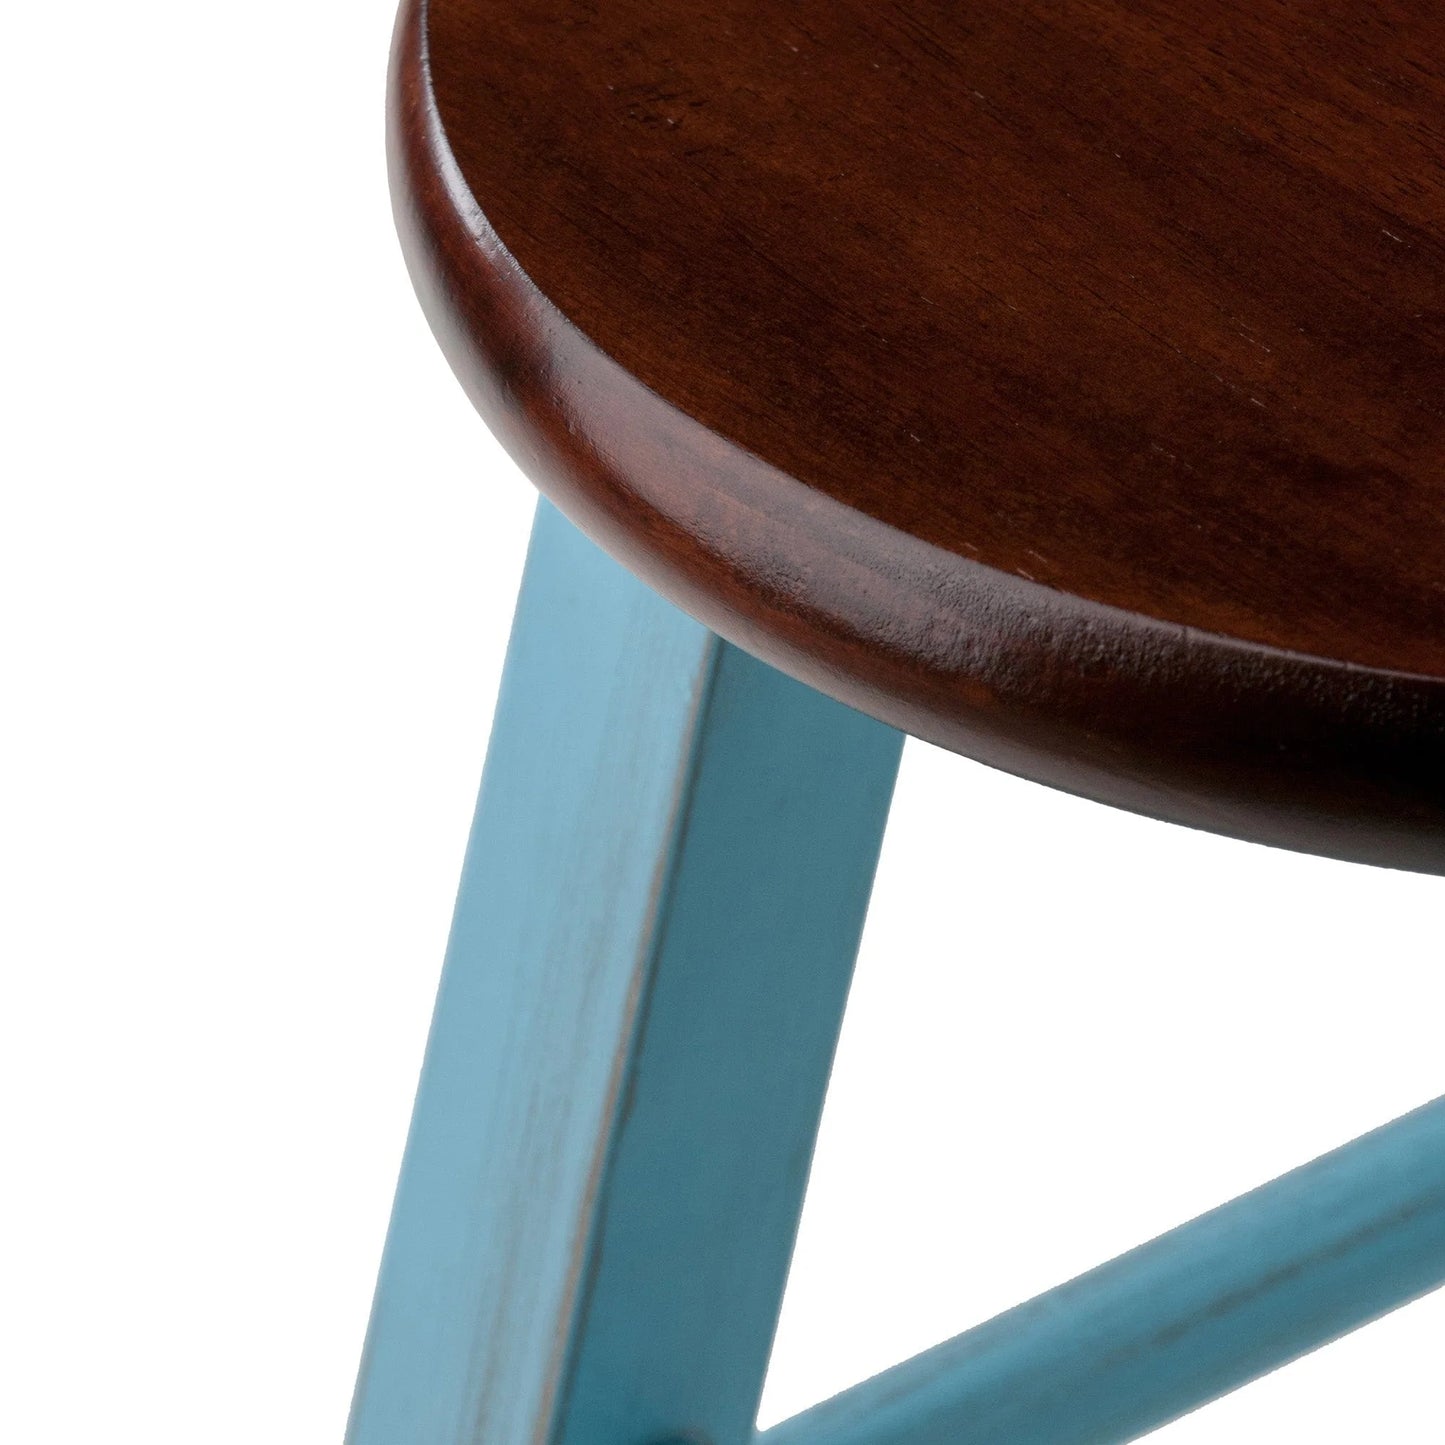 WINSOME Stool Ivy Counter Stool, Rustic Light Blue and Walnut